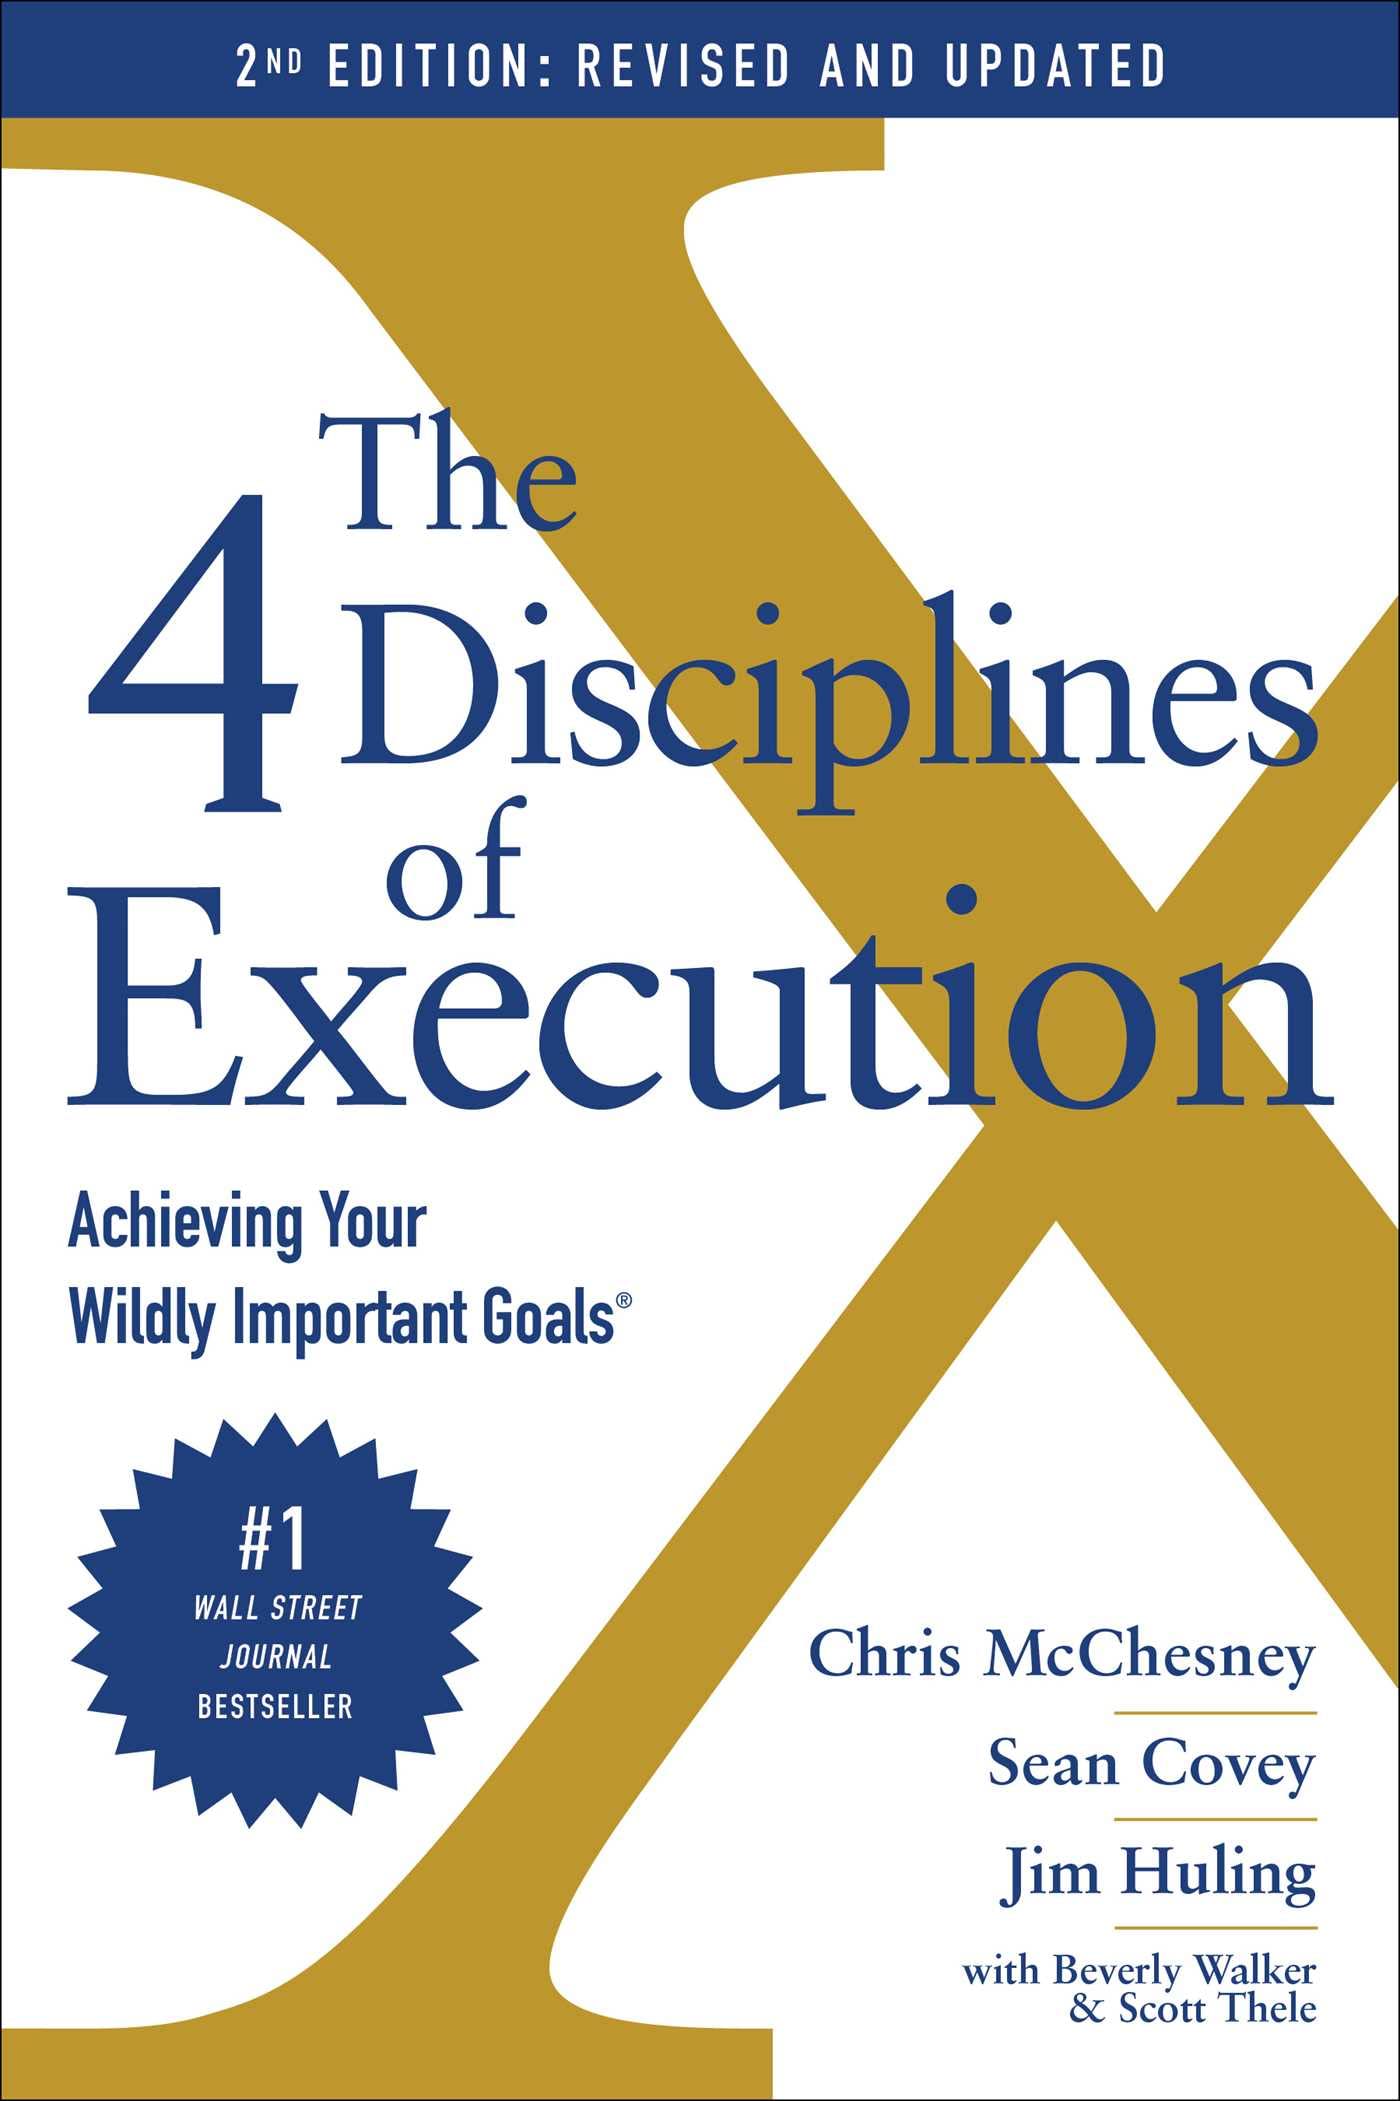 The 4 Disciplines of Execution Amazon cover